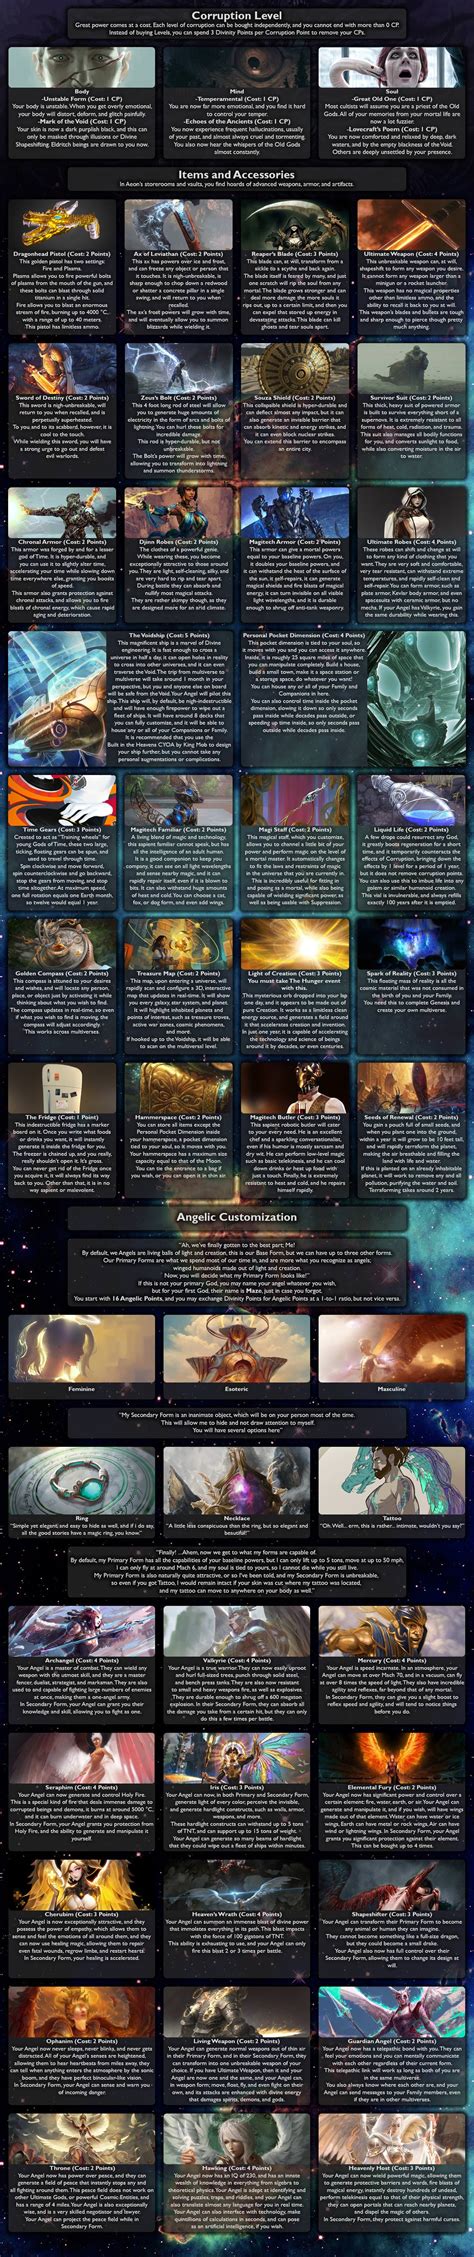 God cyoa. It's made by ItalicsAnon. Empire (45 tokens), Undead (5 tokens, +2 agility, no tech skills, price on seemingly all units is halved), Magic Skill (25 tokens). Divisions: 13 Infini-scale: Cleric (4 tokens), Paladin (5 tokens, requires 2 knights), 2 knights (2 each) (paladin sacrifices half health, Cleric restores health. 